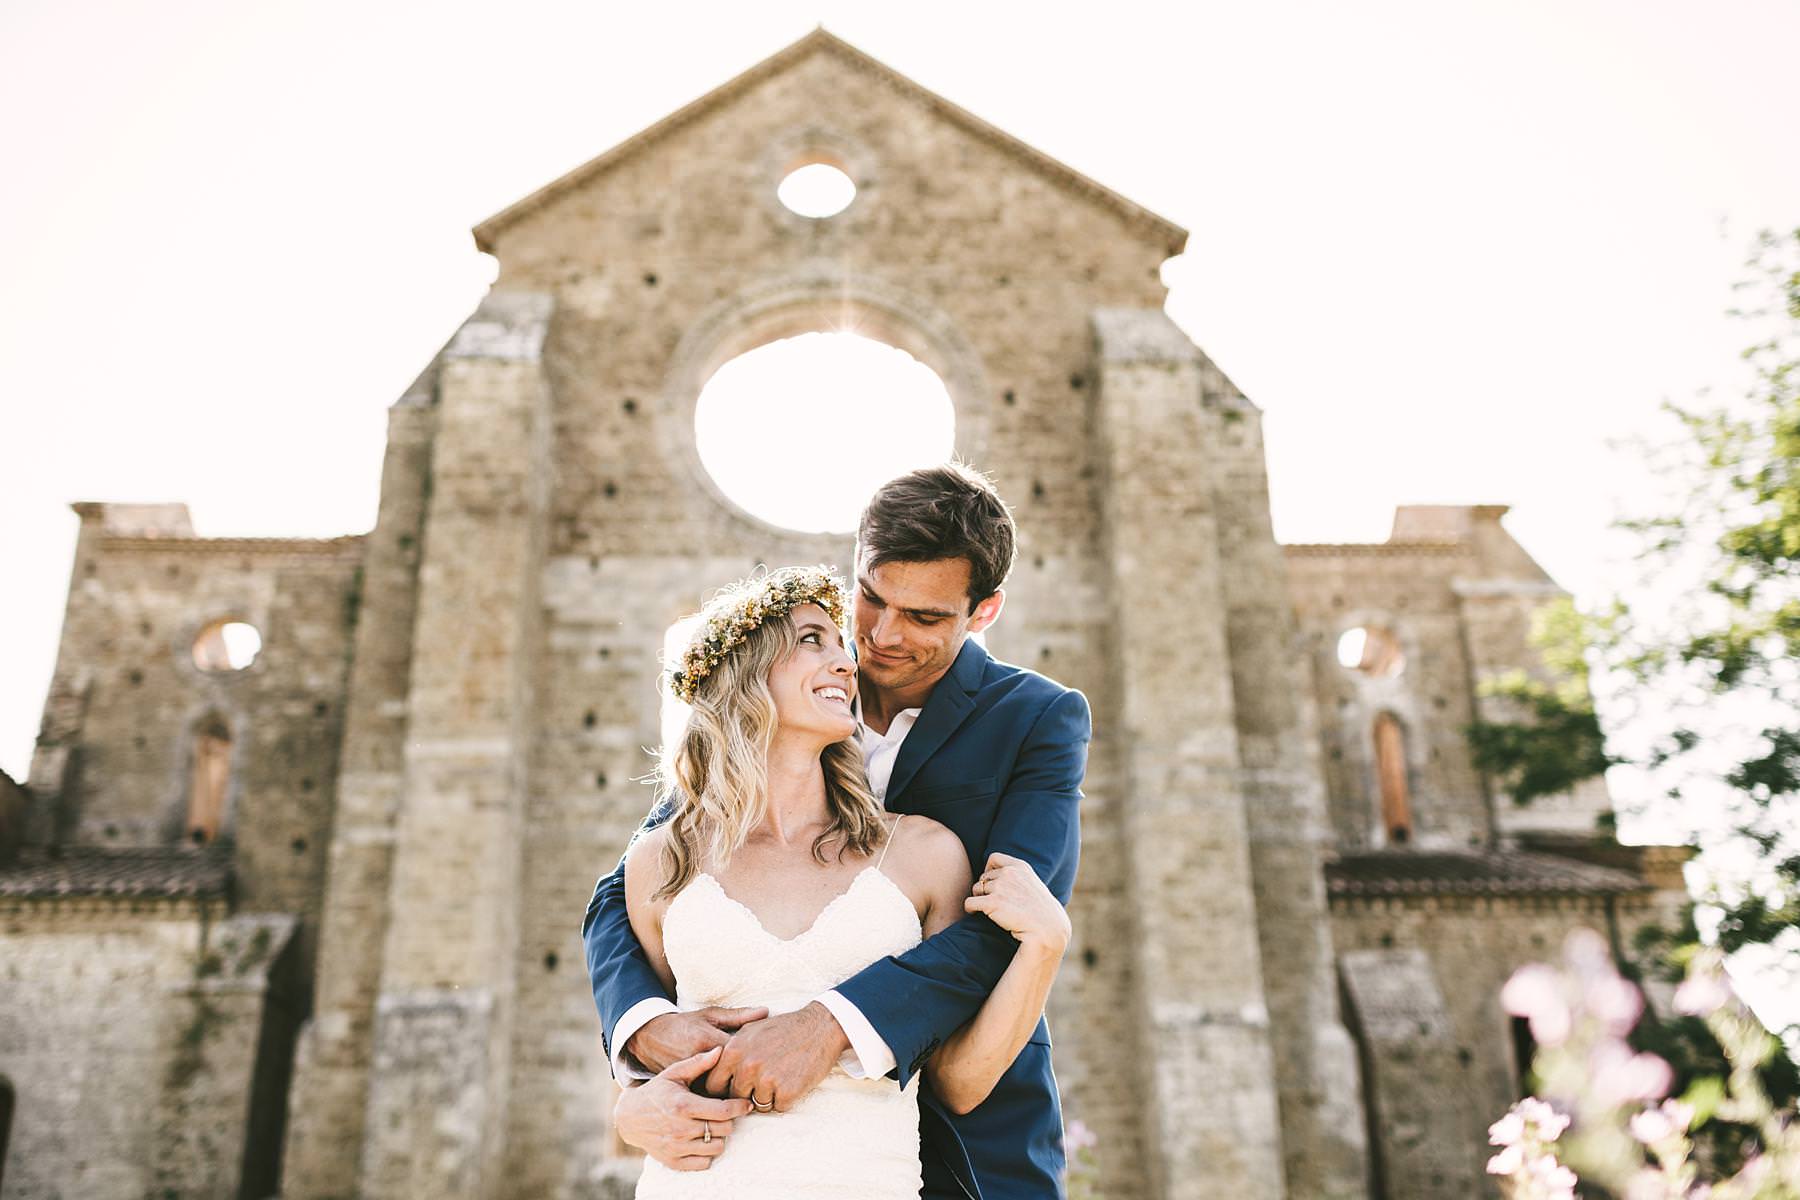 Unforgettable bride and groom wedding portrait at the Roofless Abbey of San Galgano full of colours, light, architecture and love gestures. Intimate destination Italian civil wedding in Tuscany